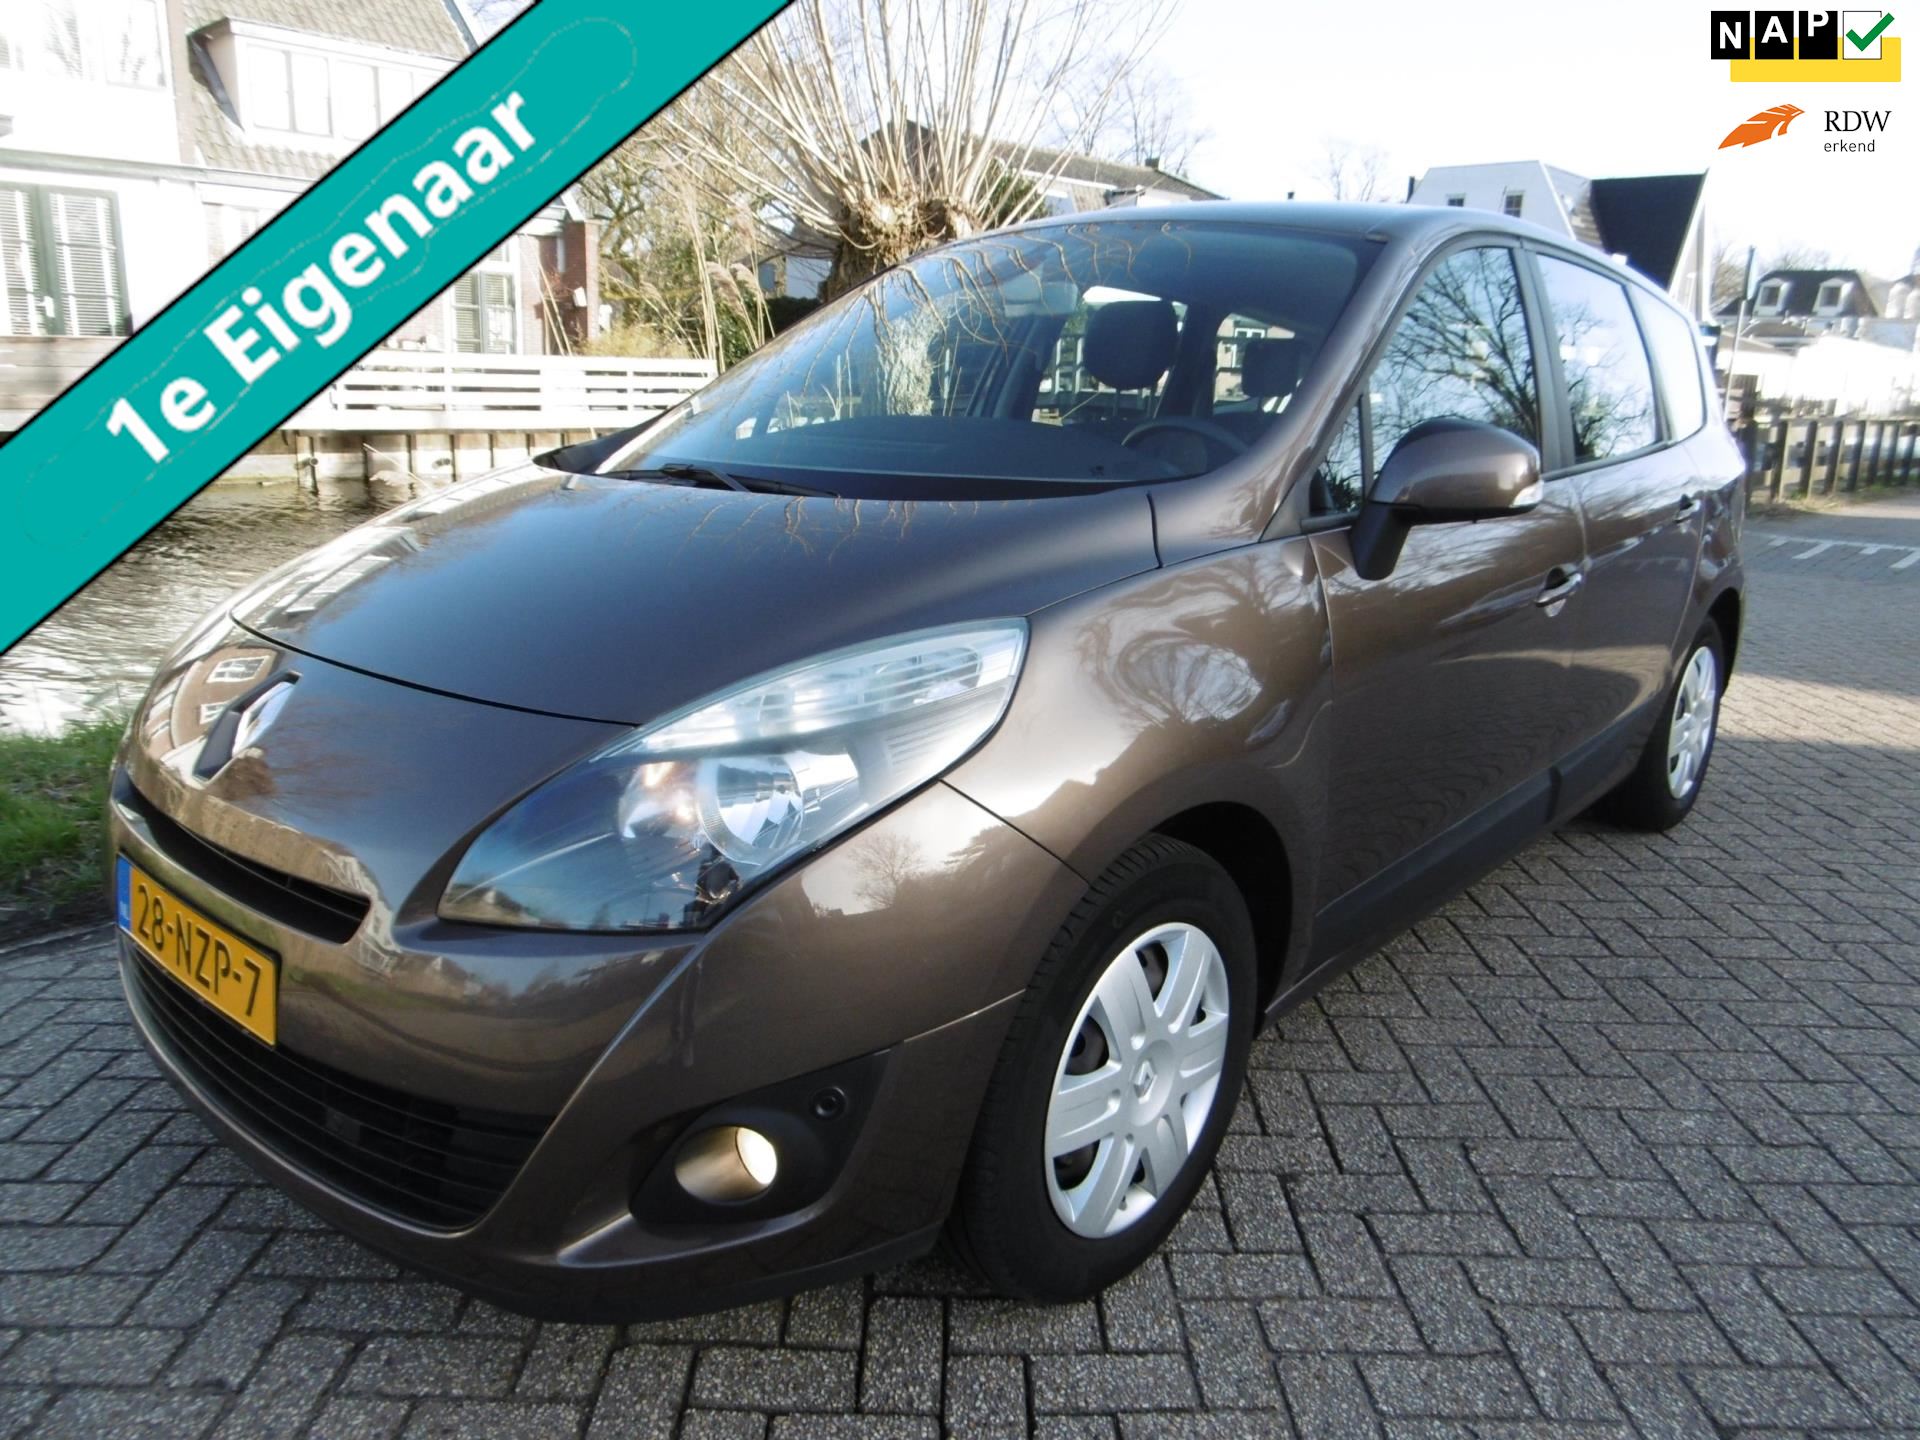 Renault Grand Scénic occasion - Occasiondealer 't Gooi B.V.